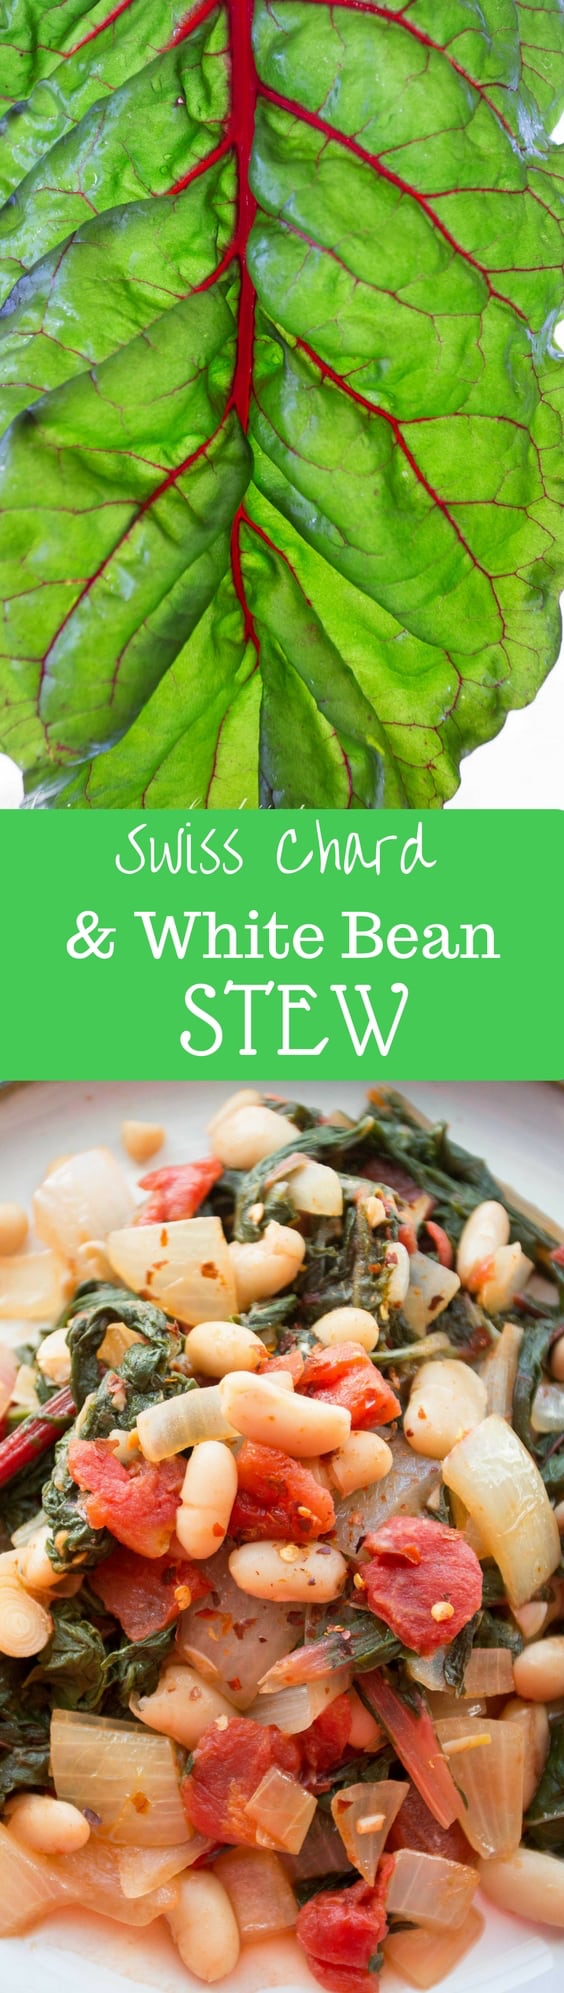 Swiss Chard & White Bean Stew with Onions & Tomatoes ~ packed with heart-healthy benefits, loads of vitamins and minerals, and tons of flavor.   www.savingdessert.com